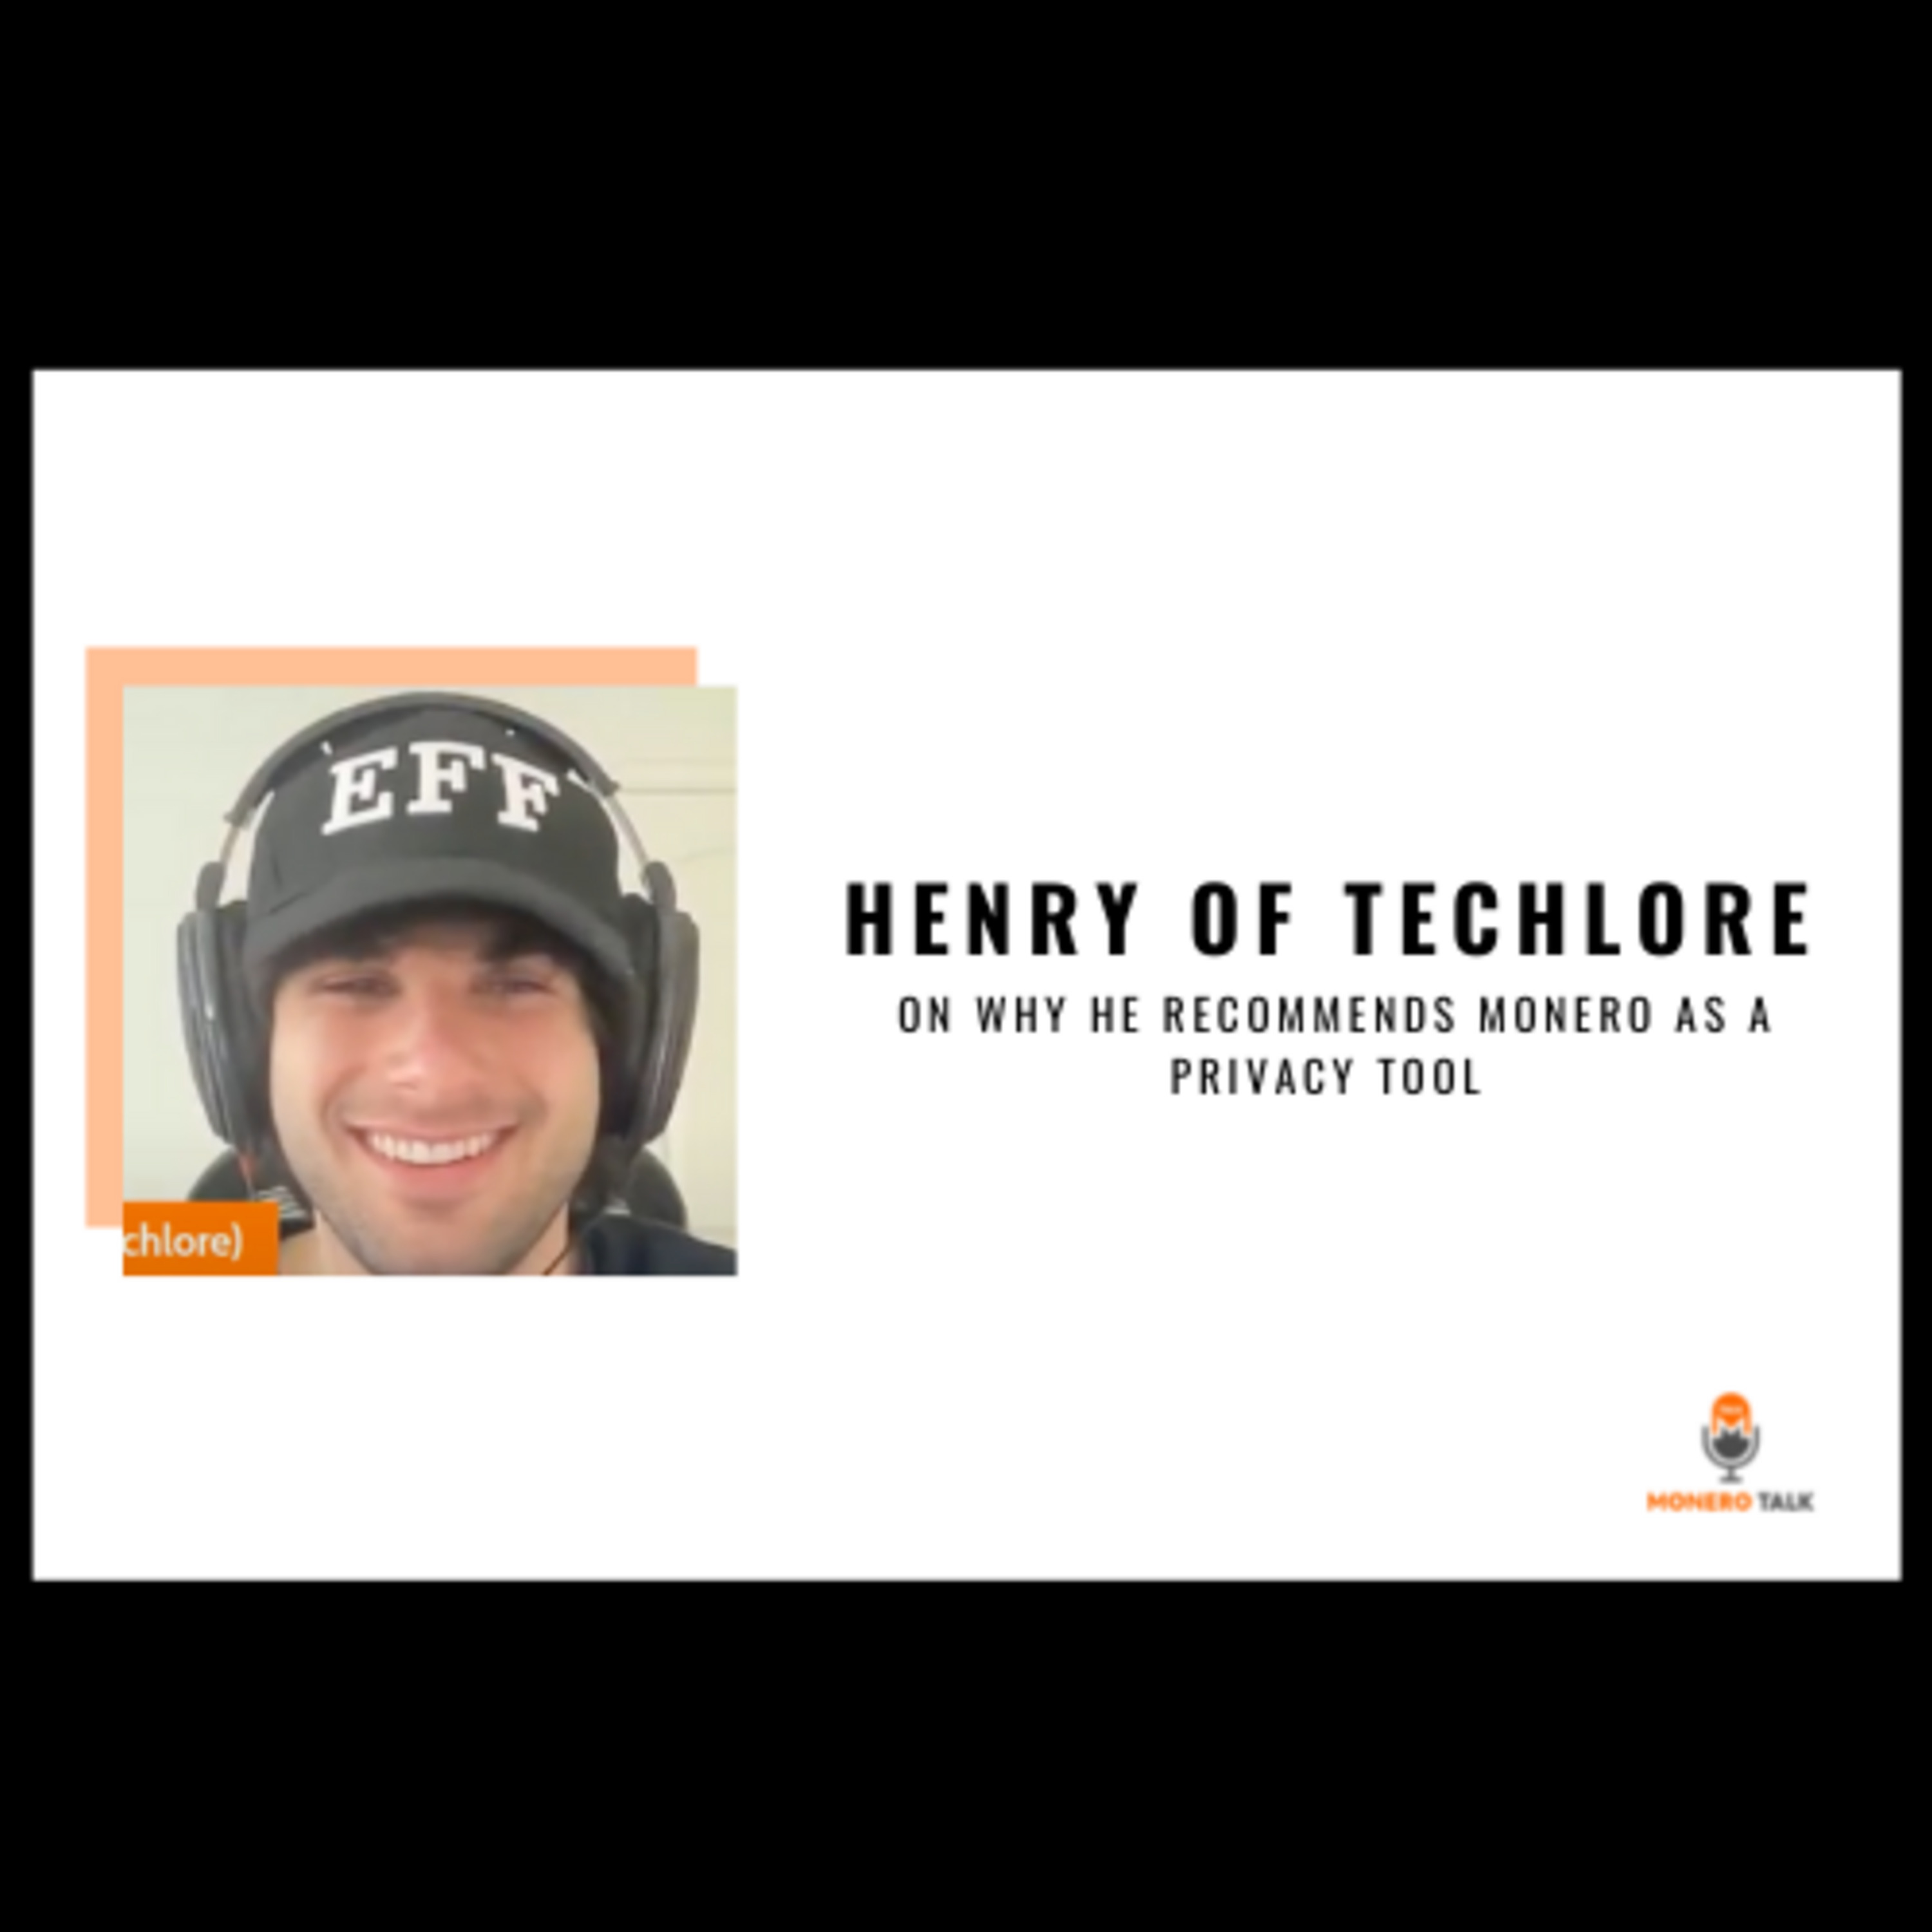 Henry of Techlore on why he recommends Monero as a Privacy Tool